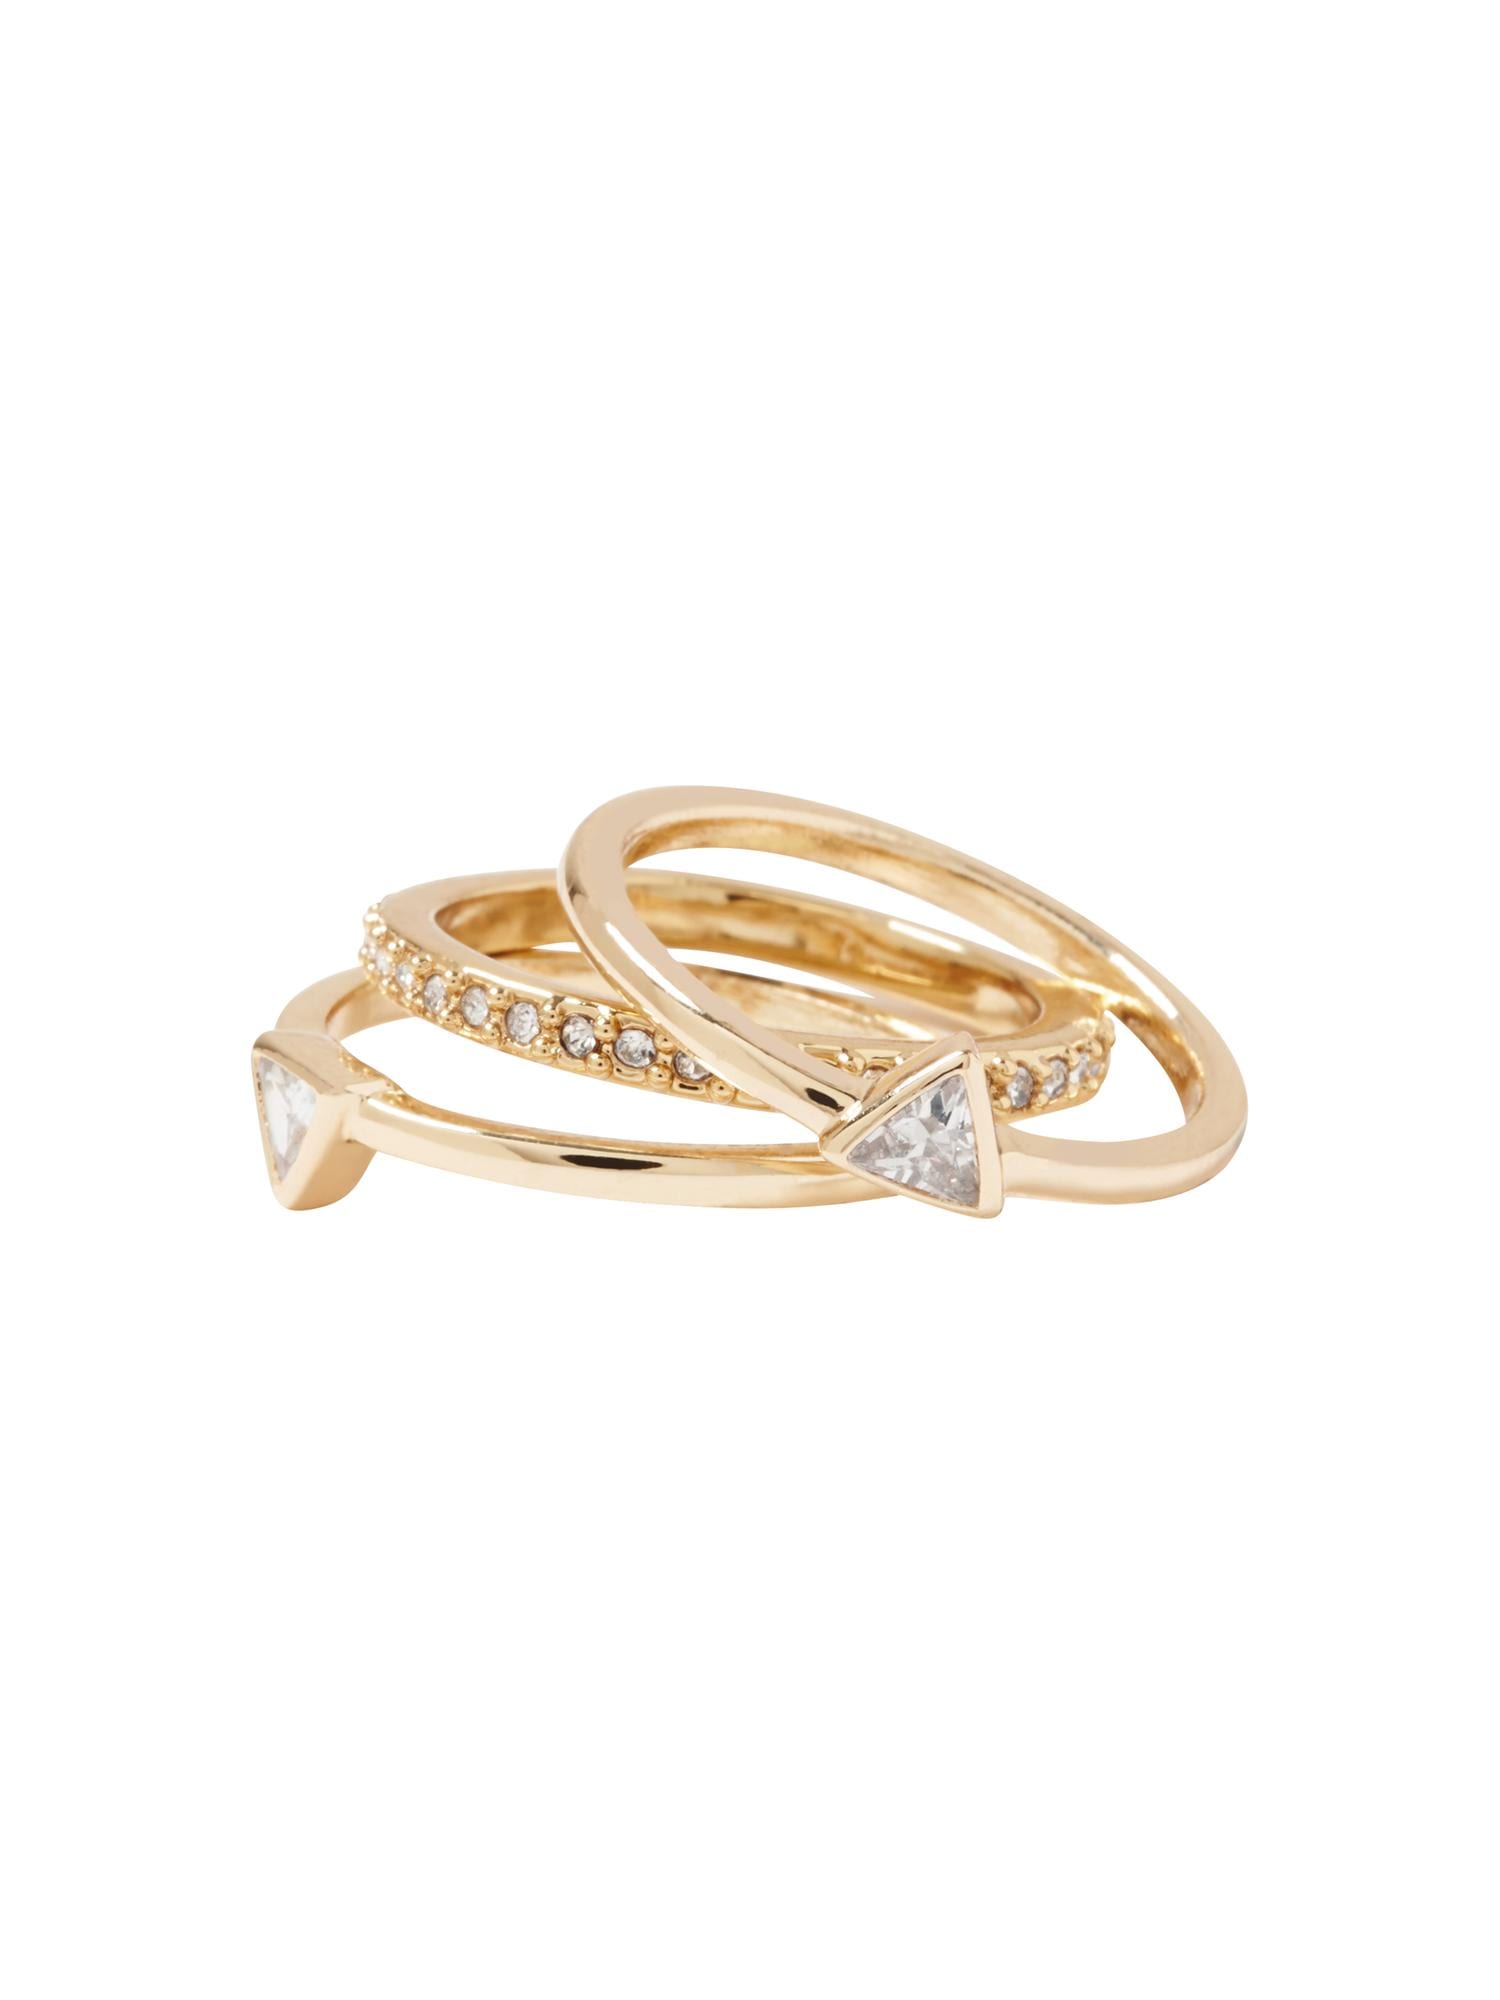 Personal Edge Stack Ring Set